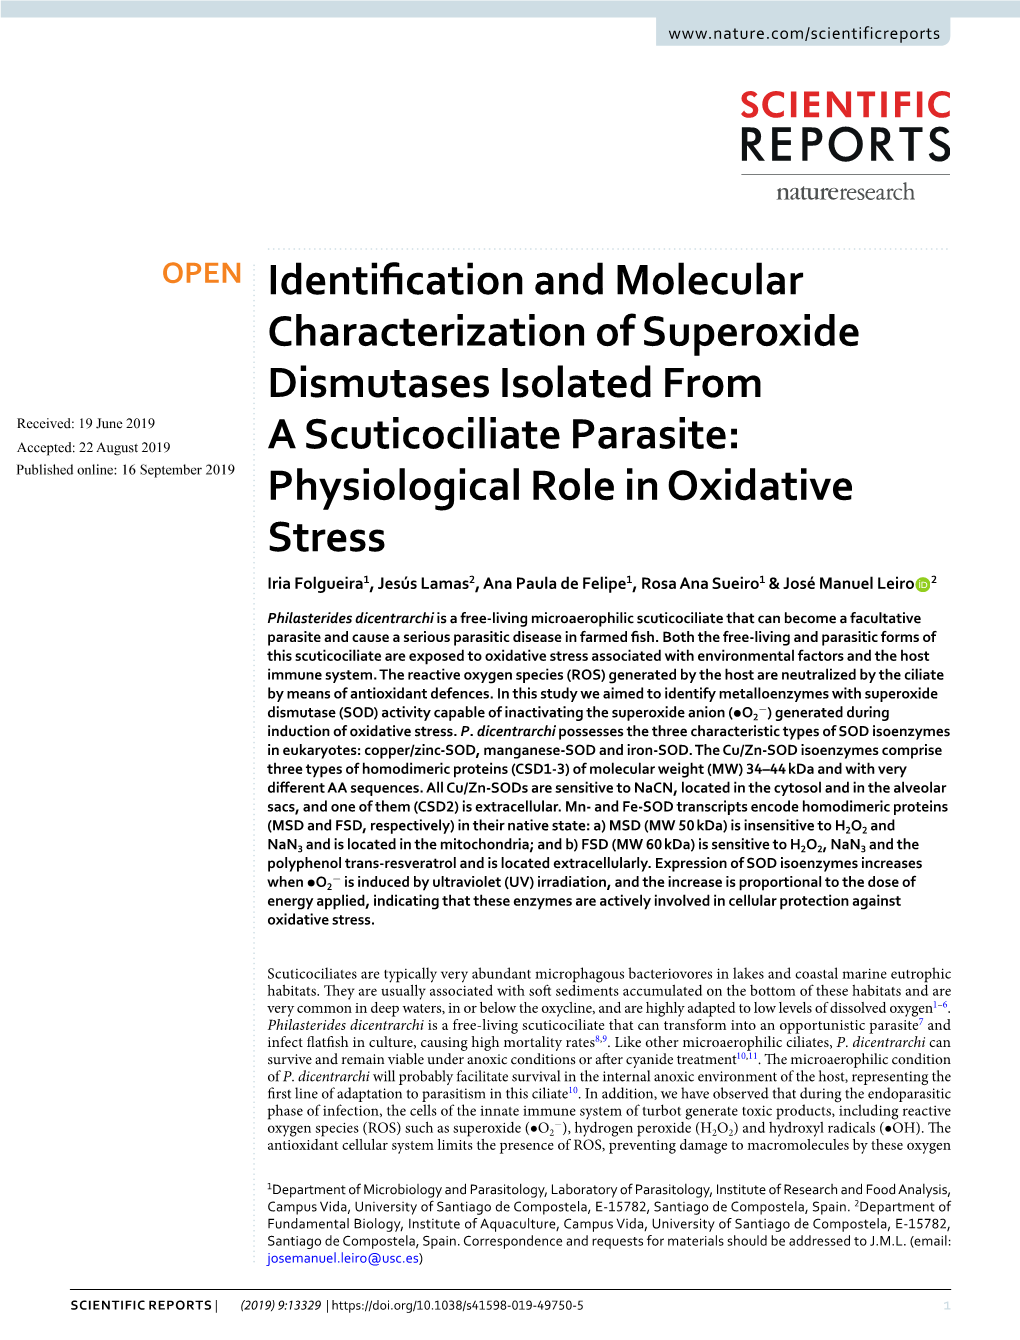 Identification and Molecular Characterization Of